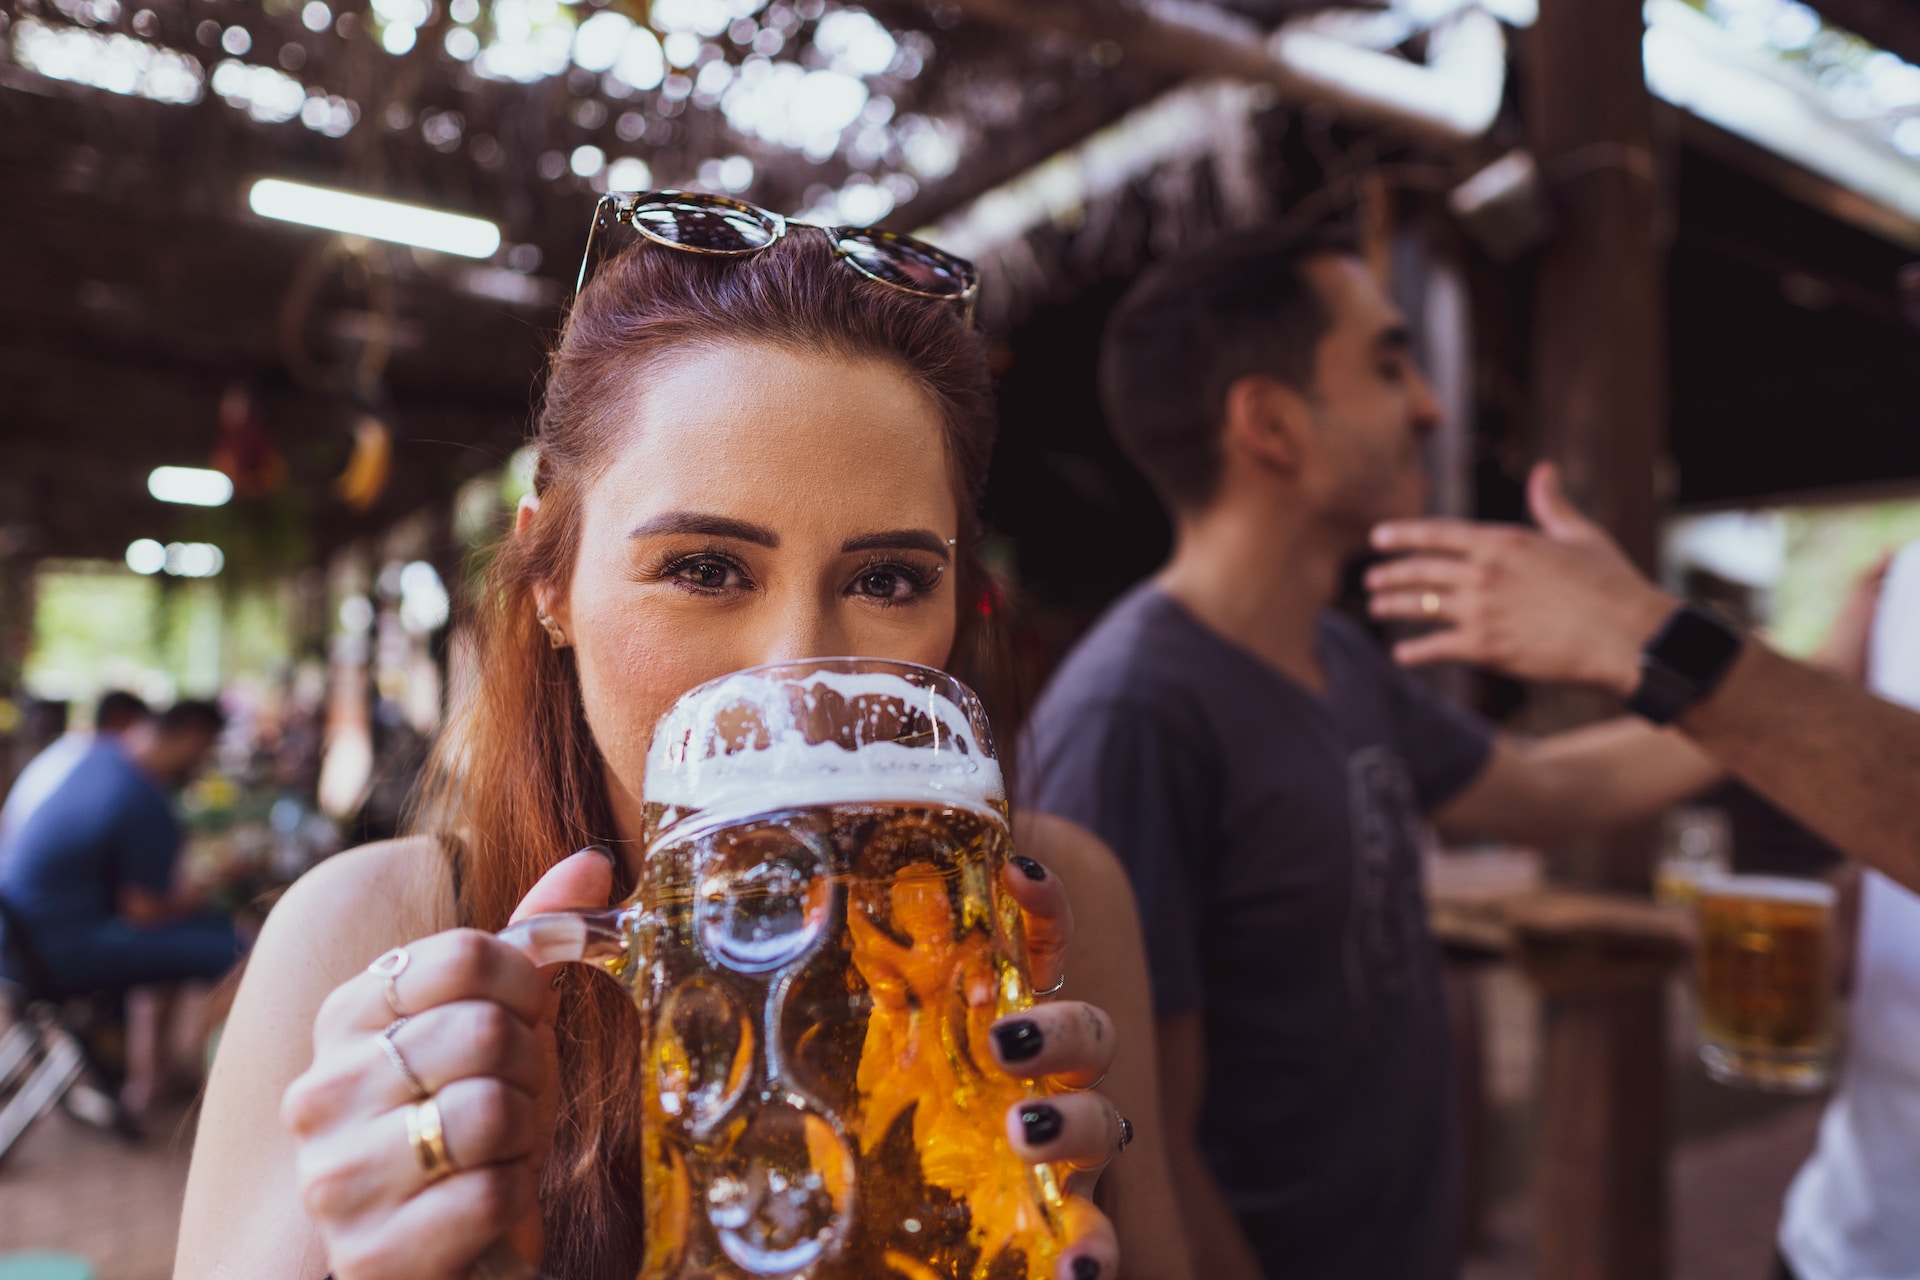 A woman in a pub holding a mug of non-alcoholic beer with both hands and drinking from it